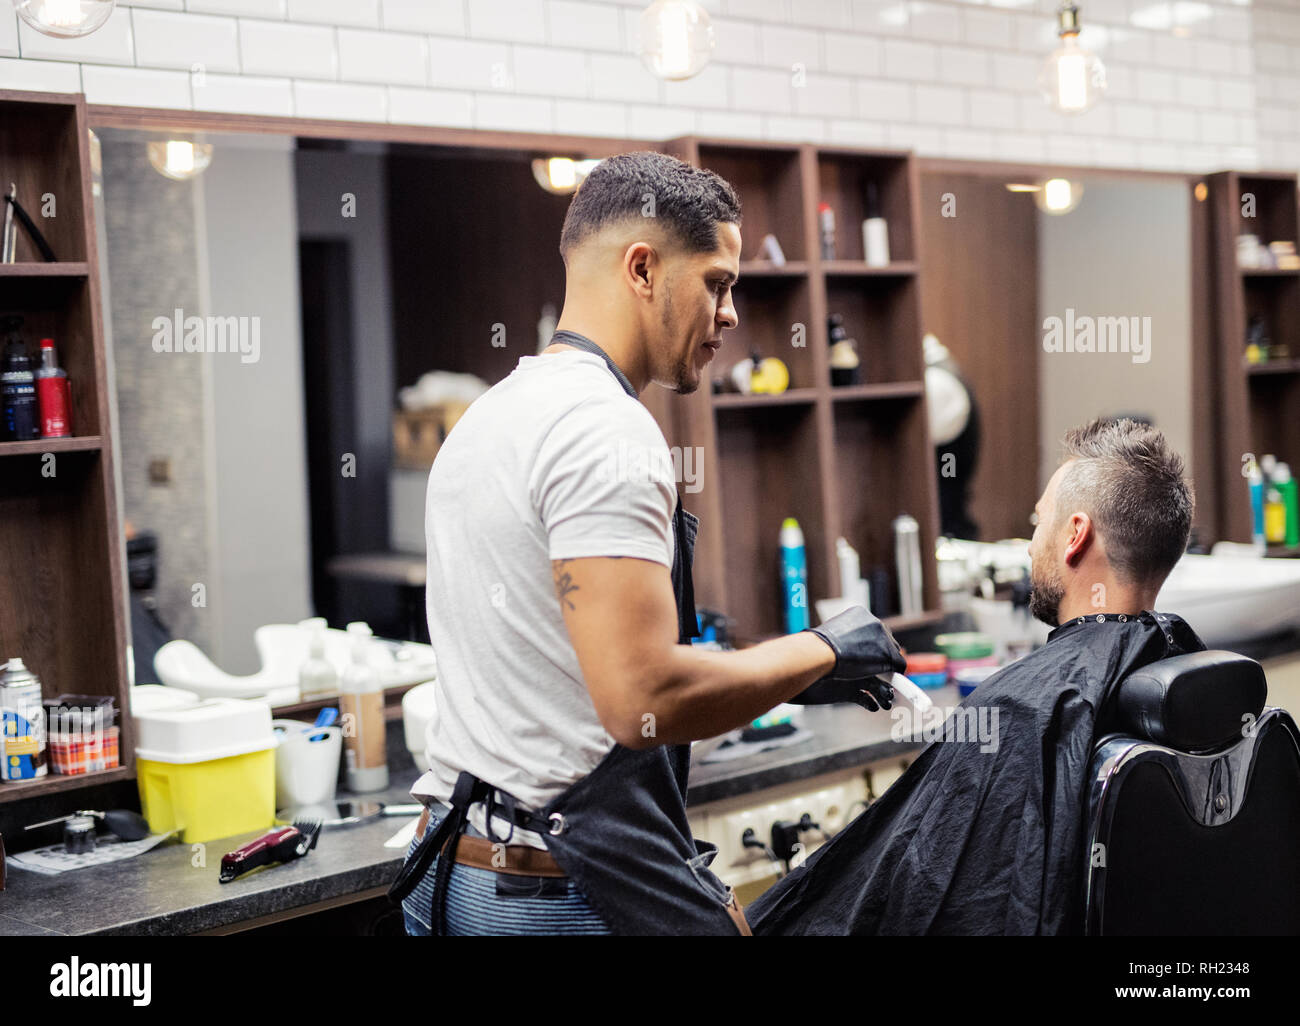 Rear view shot of man client visiting haidresser and hairstylist in barber shop. Stock Photo